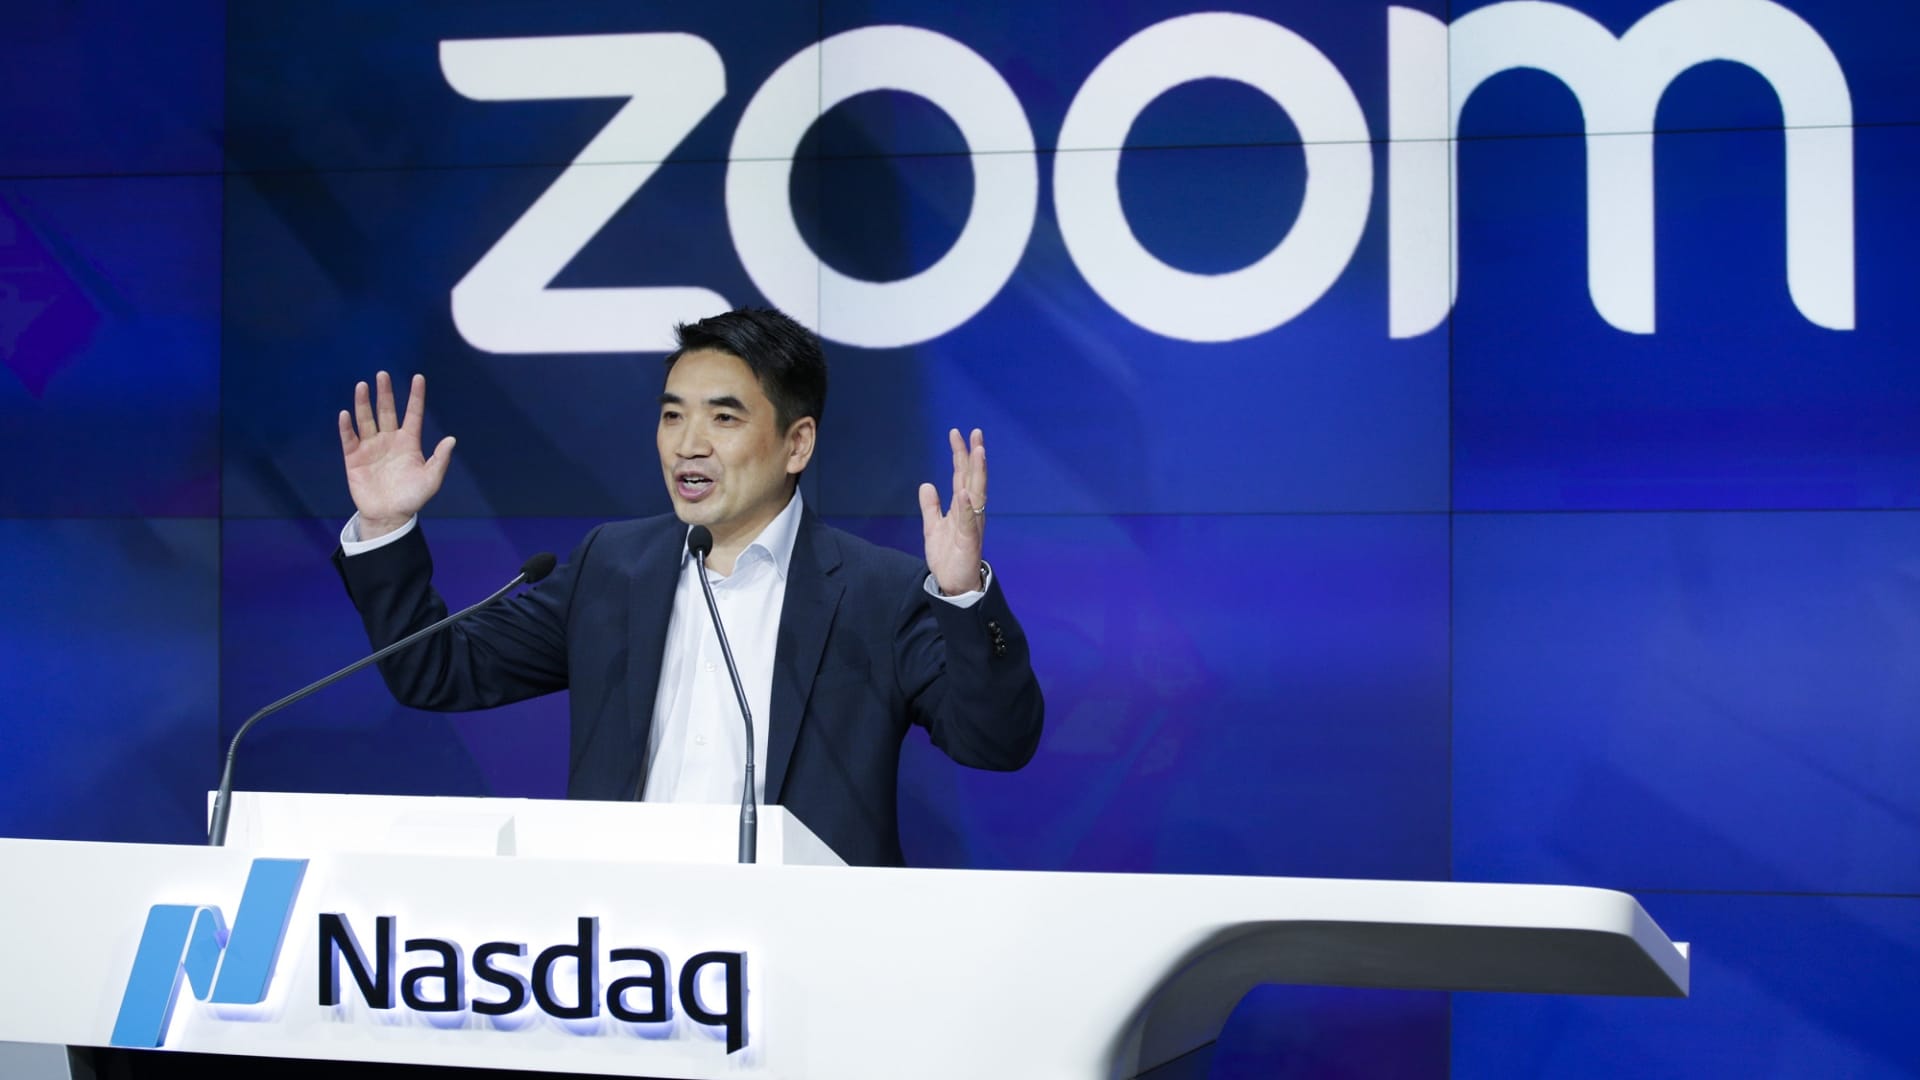 Zoom pops 16% on first-quarter earnings beat and strong guidance